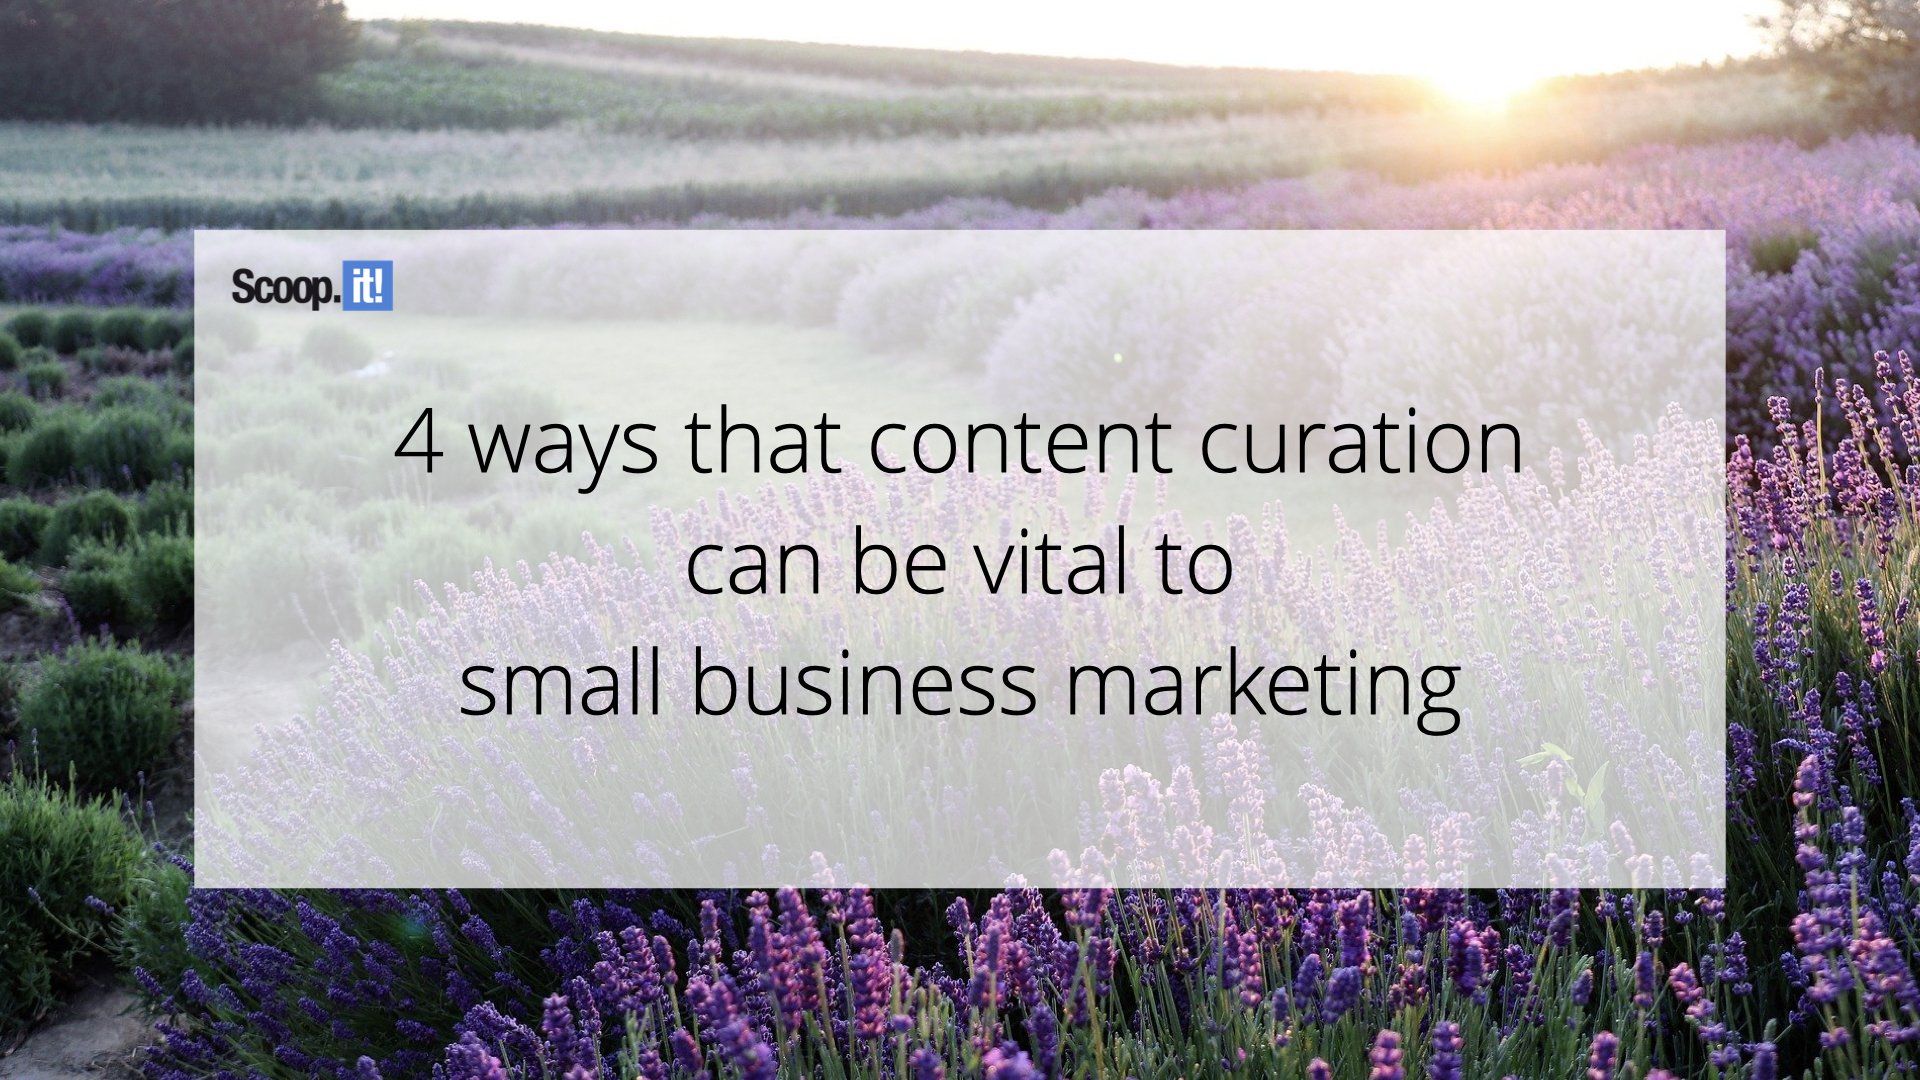 4 Ways Content Curation Can Be Vital For Small Business Marketing